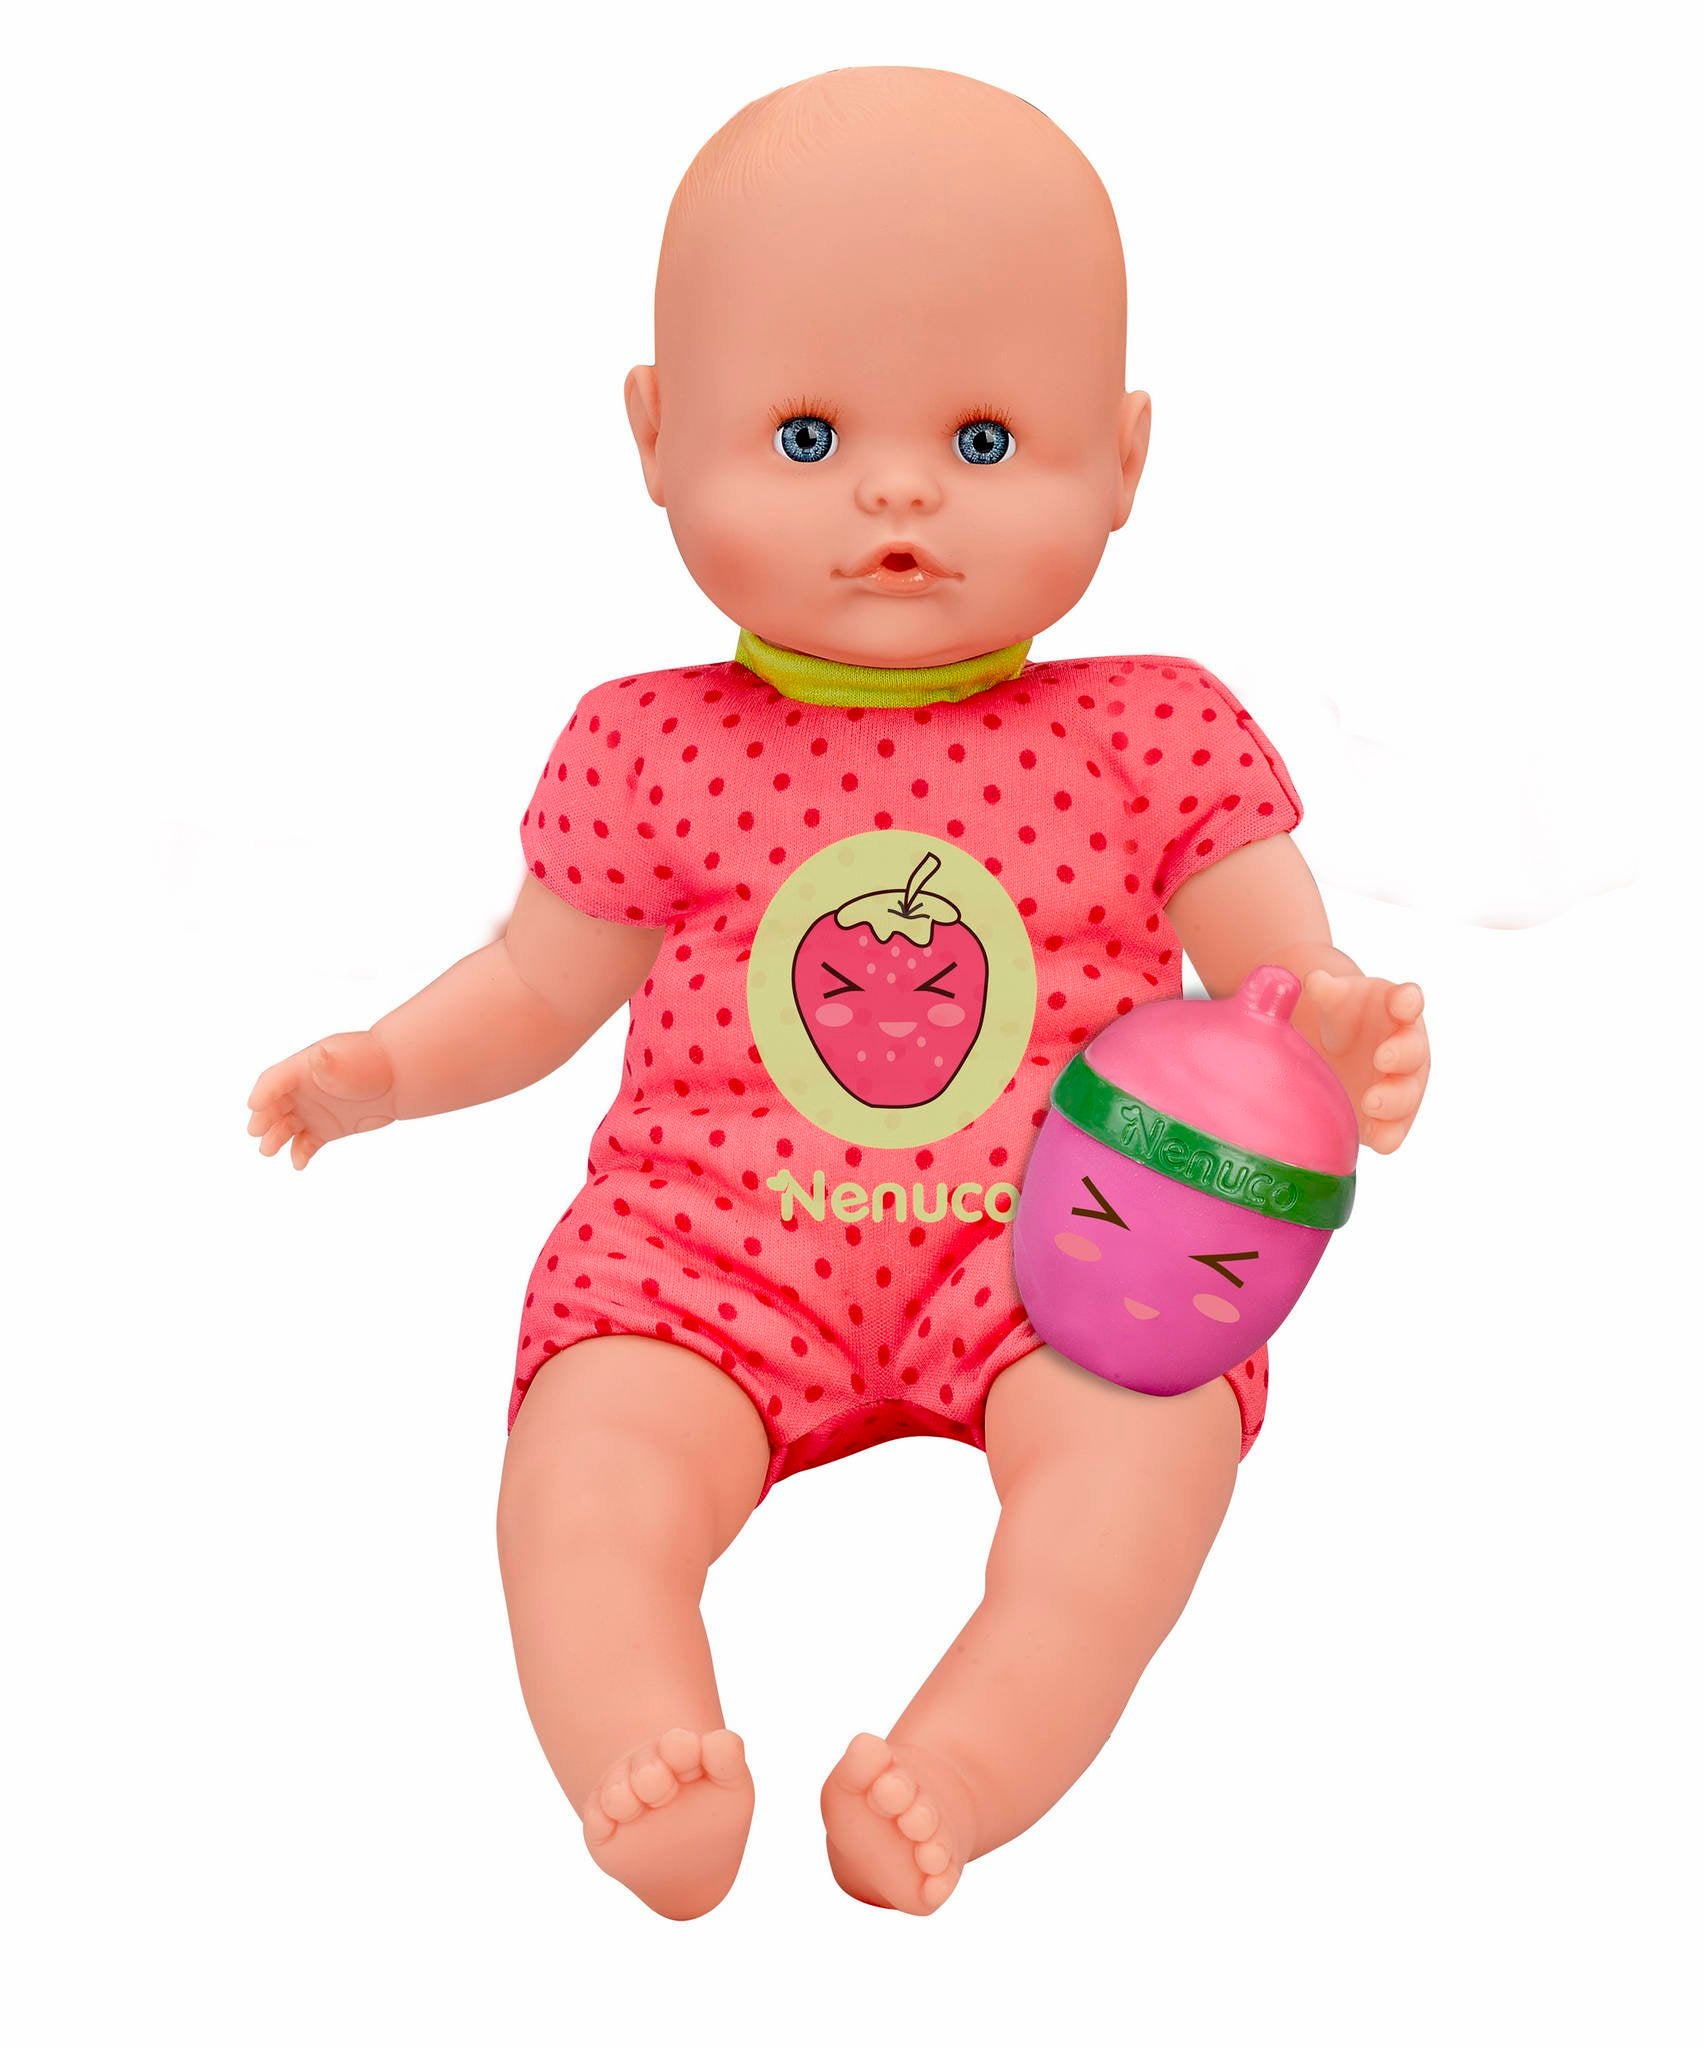 Nenuco - Soft Baby Doll with Rattle Bottle, Colorful Outfits, 35 cm – K Ltd.